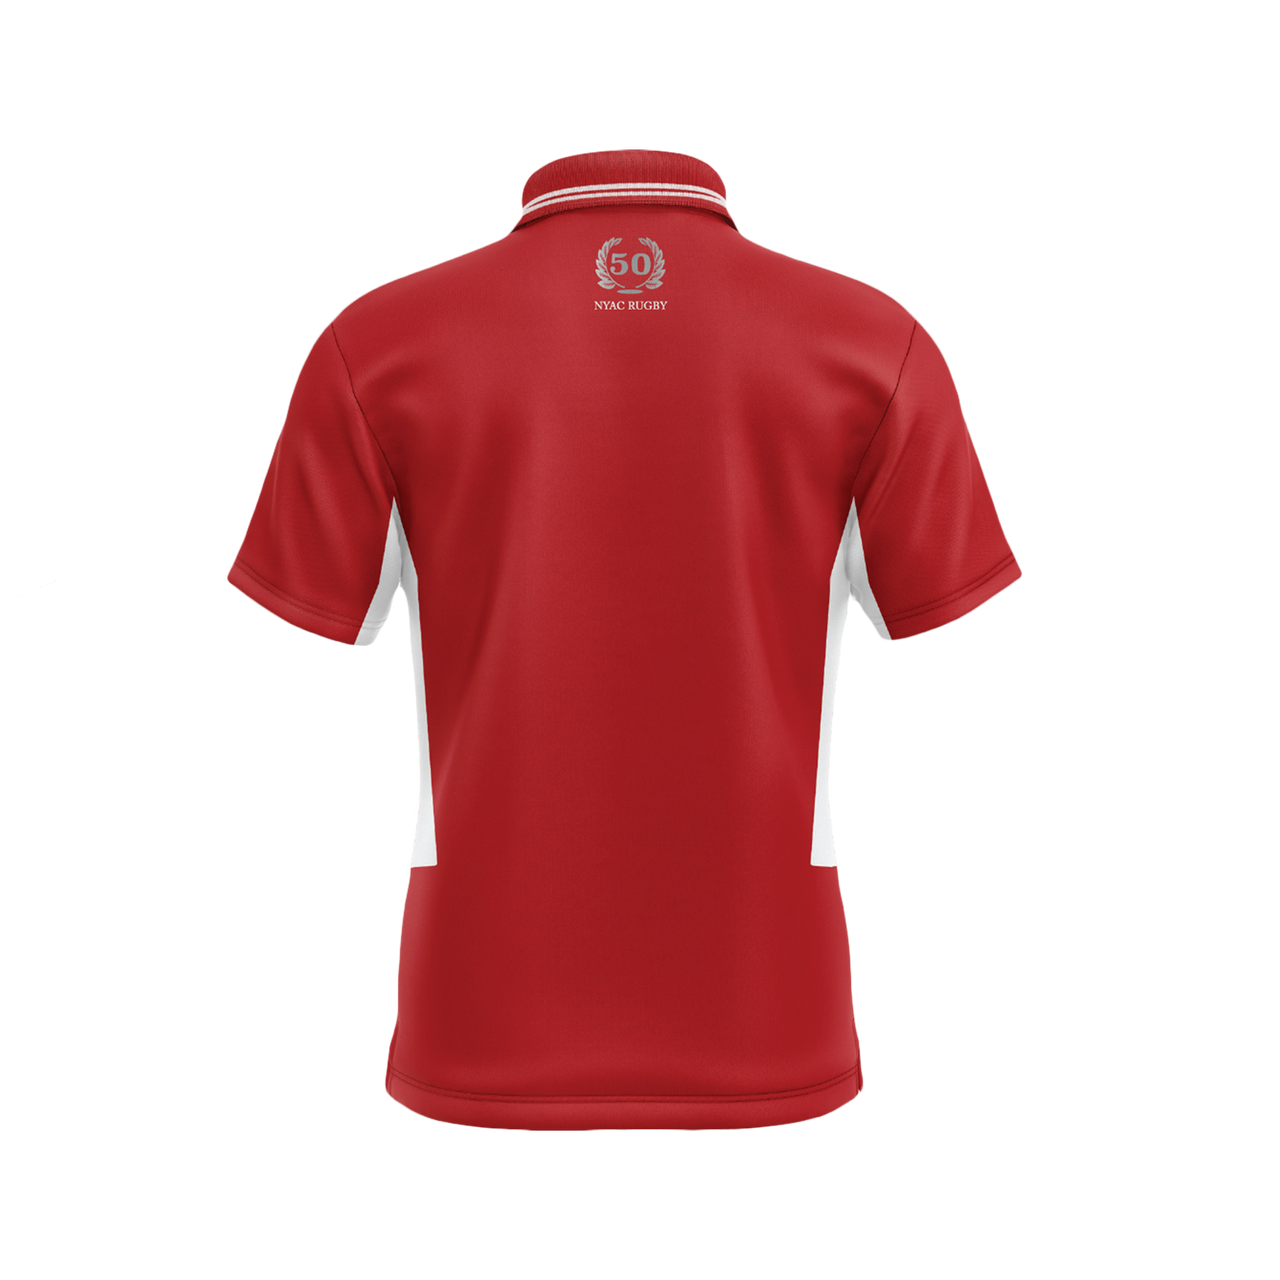 NYAC Rugby Men's Polo Shirt - Red